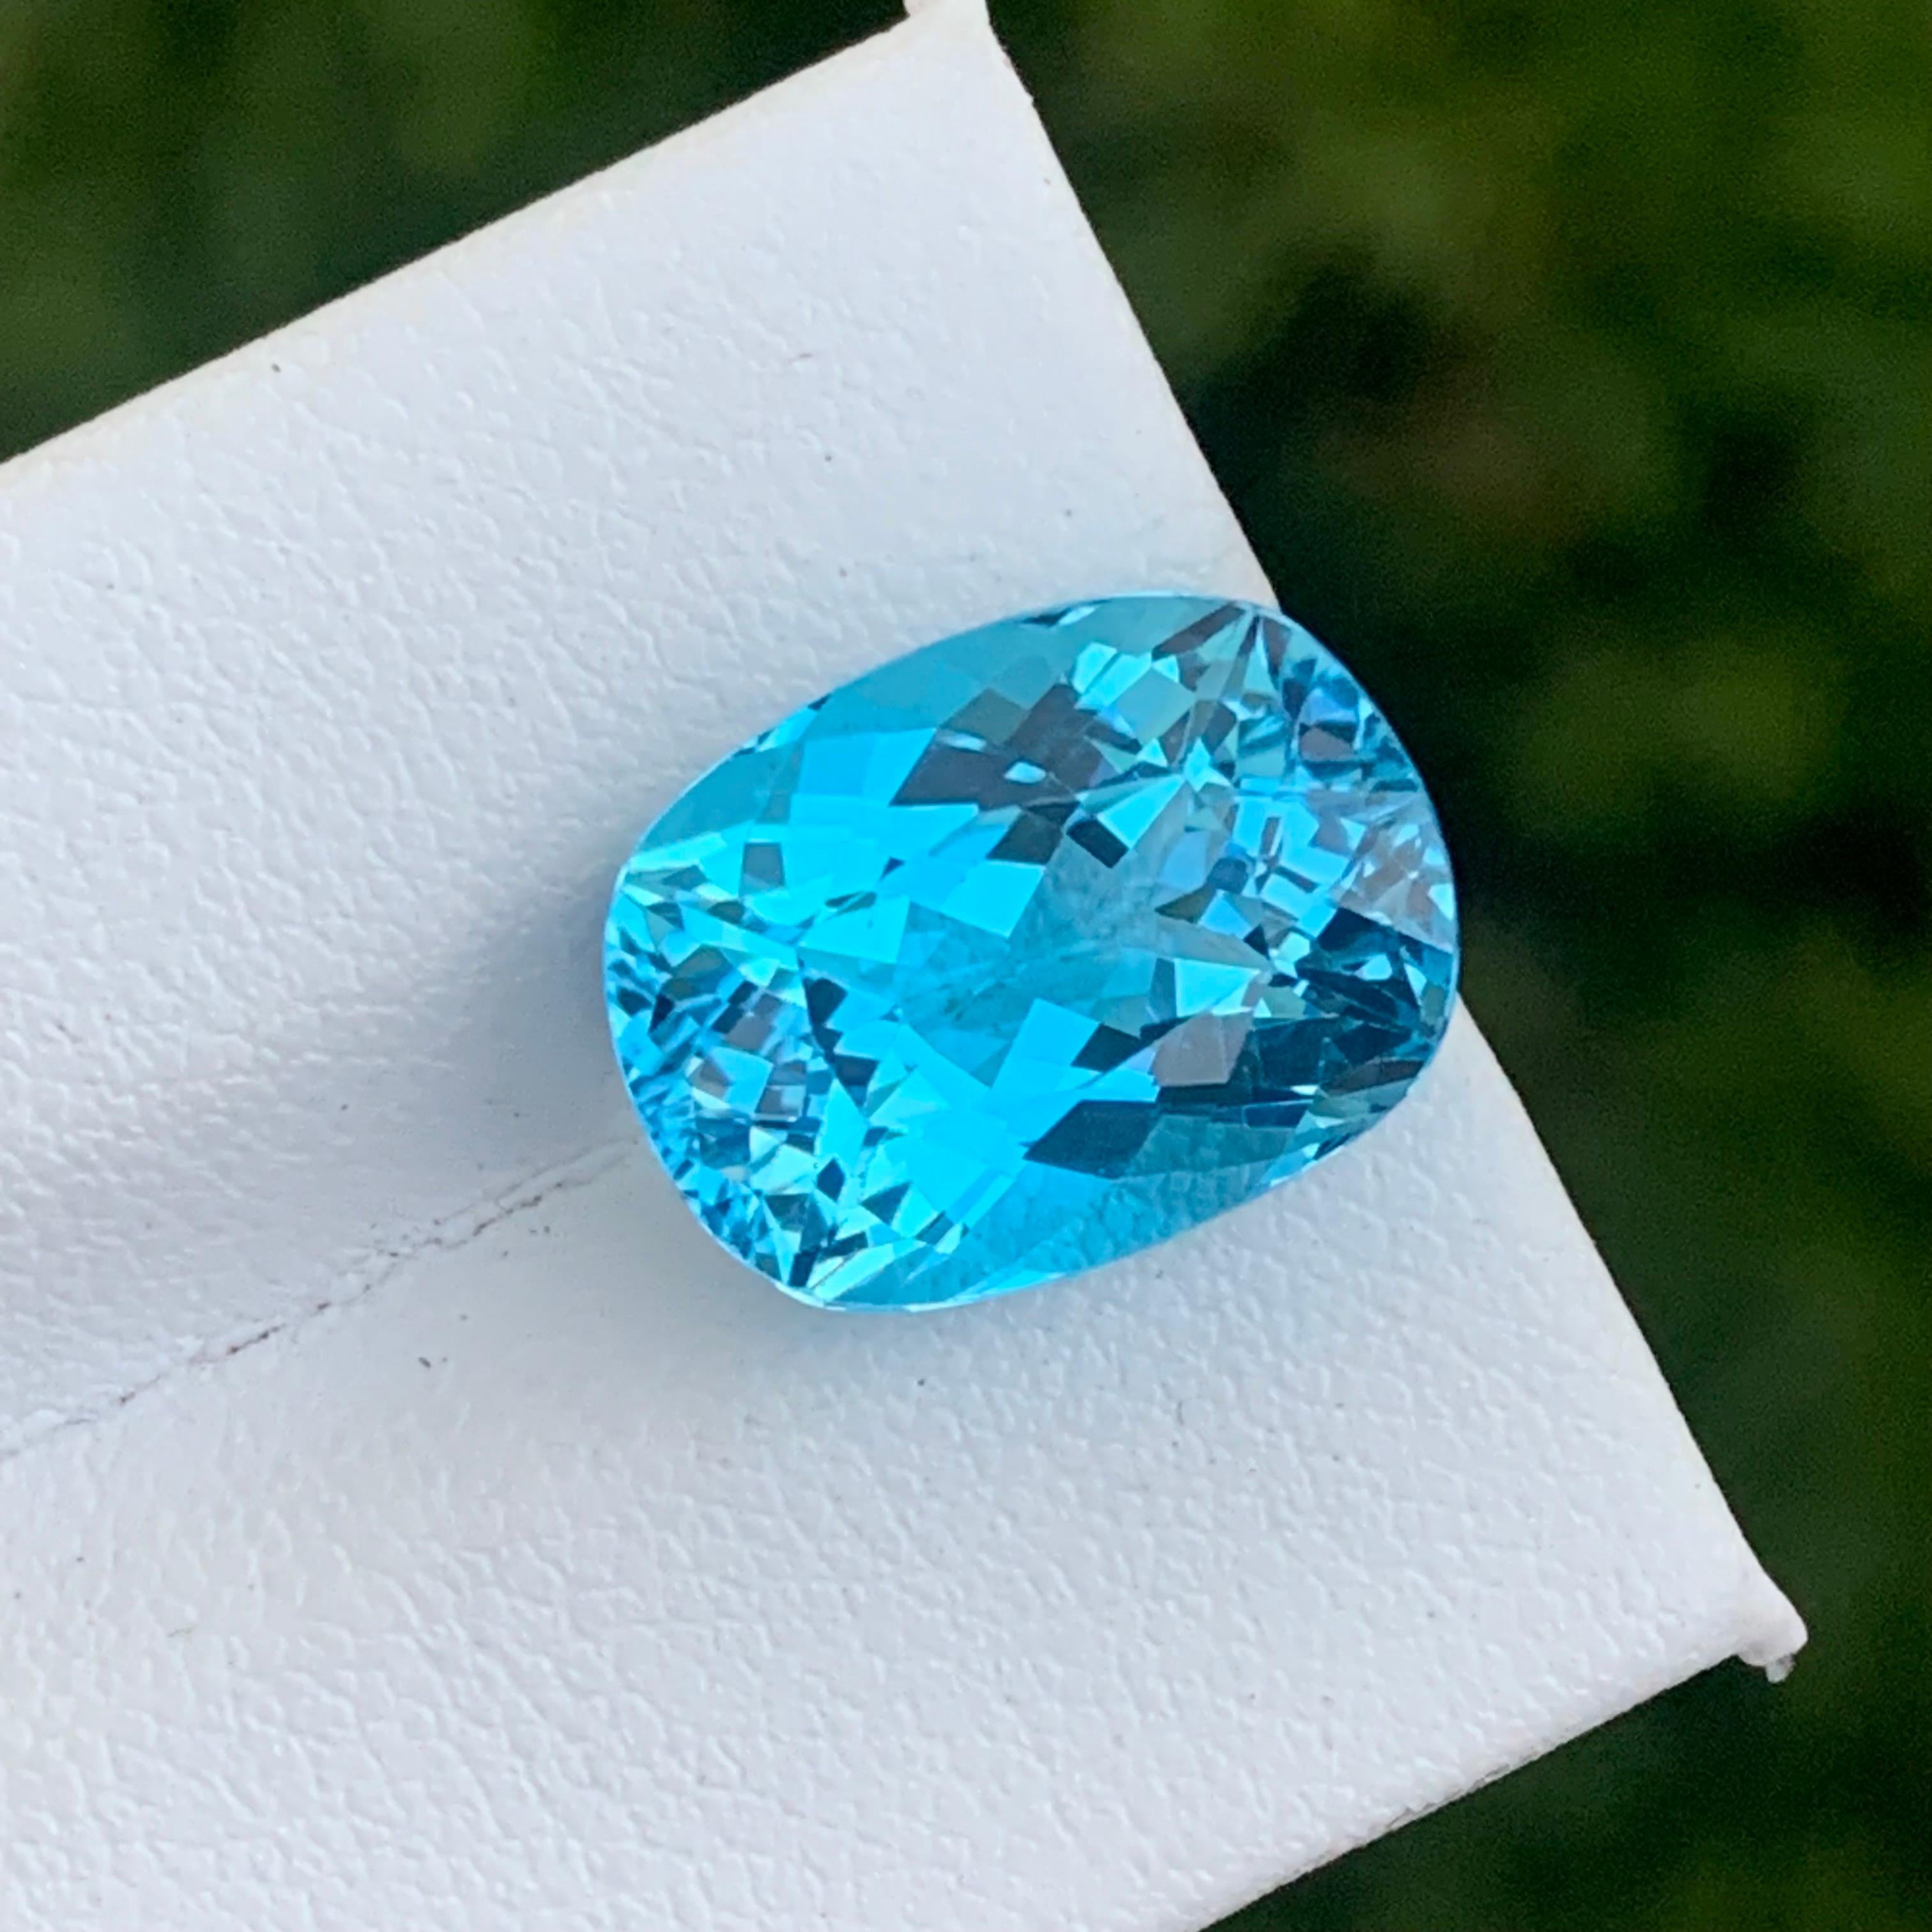 Beautiful Faceted Sky Blue Topaz
Weight: 12.20 Carats ⚖️
Dimension: 15x11.3x8.7 Mm ⚖️
Origin: Brazil
Shape: Long Cushion 
Certificate: On Demand 
.

Blue topaz, in particular, is believed to promote truth and forgiveness, relaxing the spirit as well